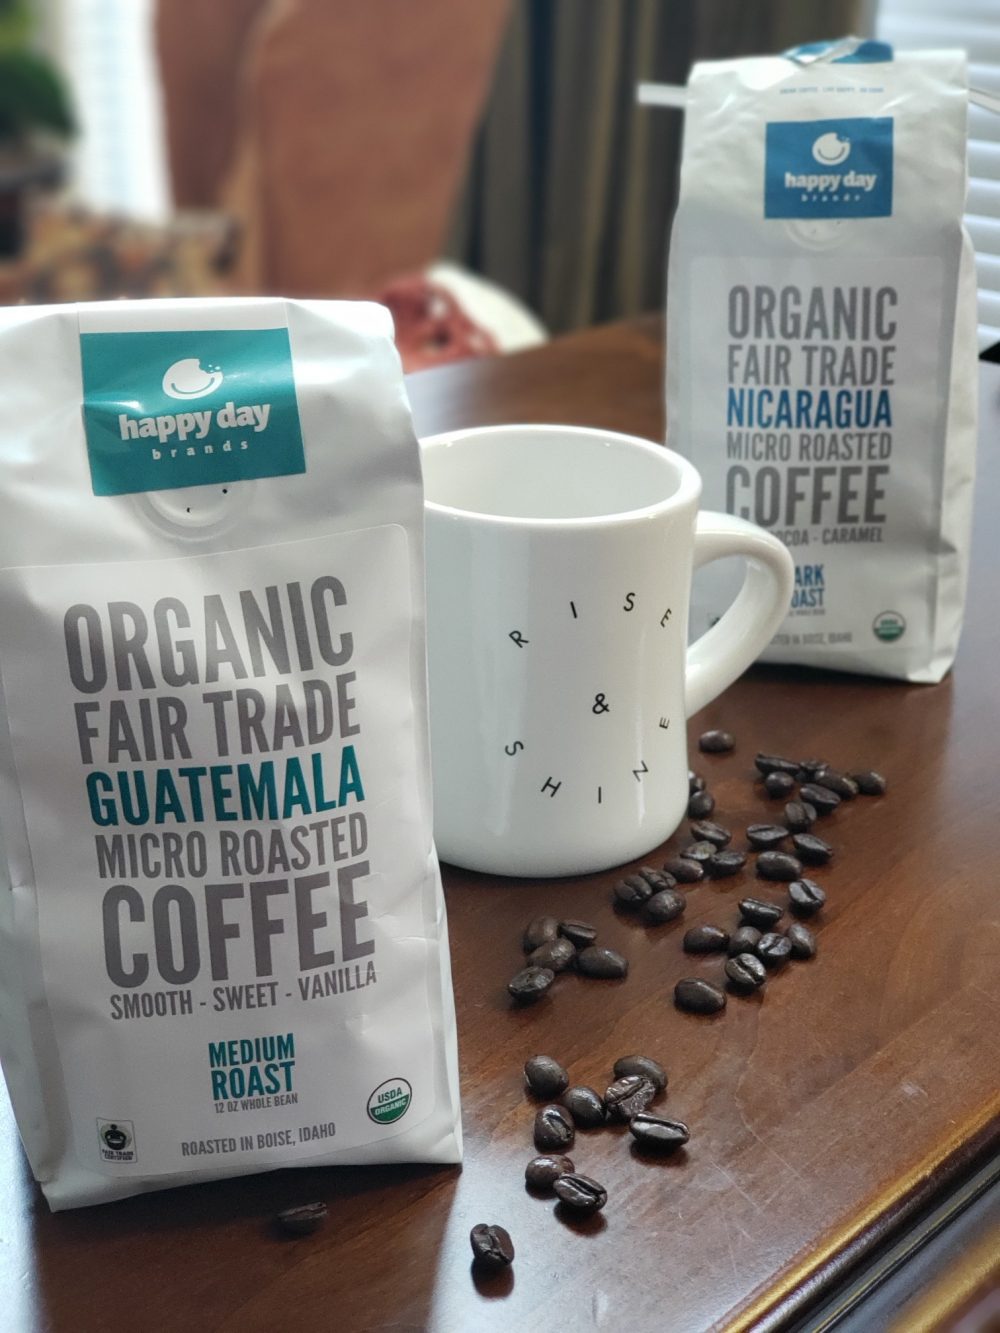 Fair trade Organic Coffee from Happy Day Brands